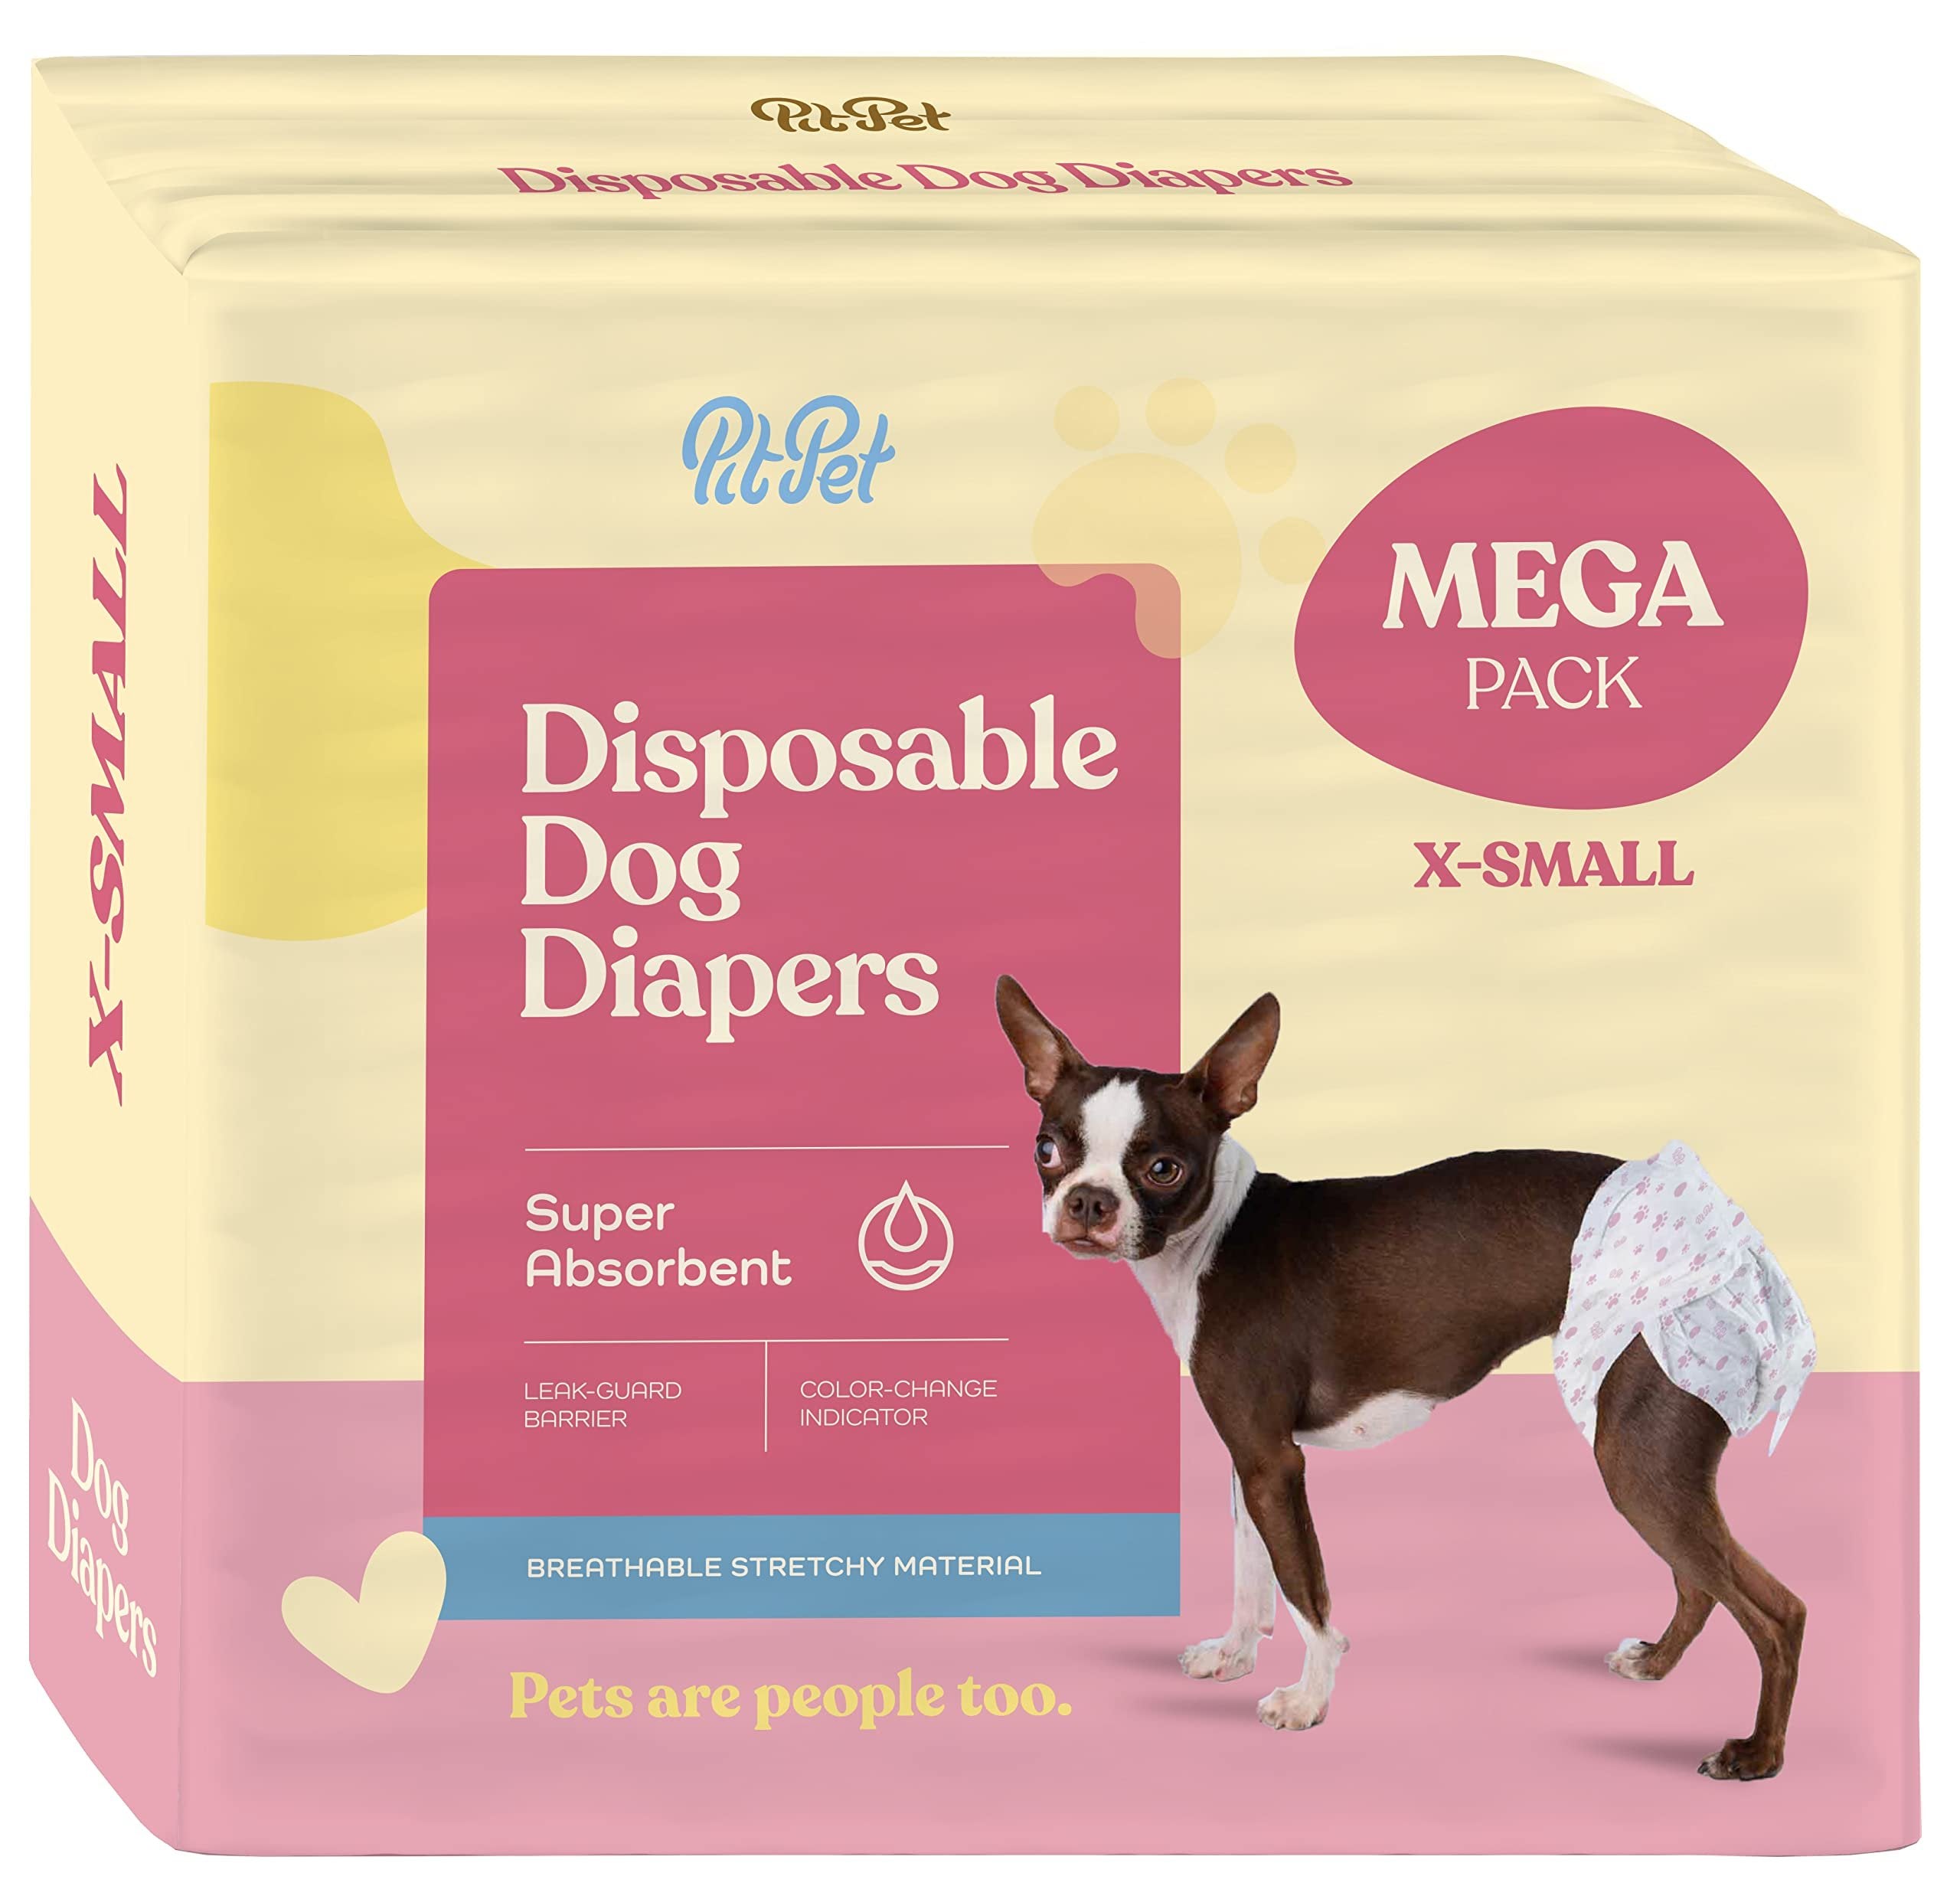 Comfortable Female Dog Diapers - 30-Pack Super Absorbent Disposable Doggie Diapers - FlashDry Gel Technology & Wetness Indicator - Leakproof Diapers for Dogs in Heat, Excitable Urination, Incontinence